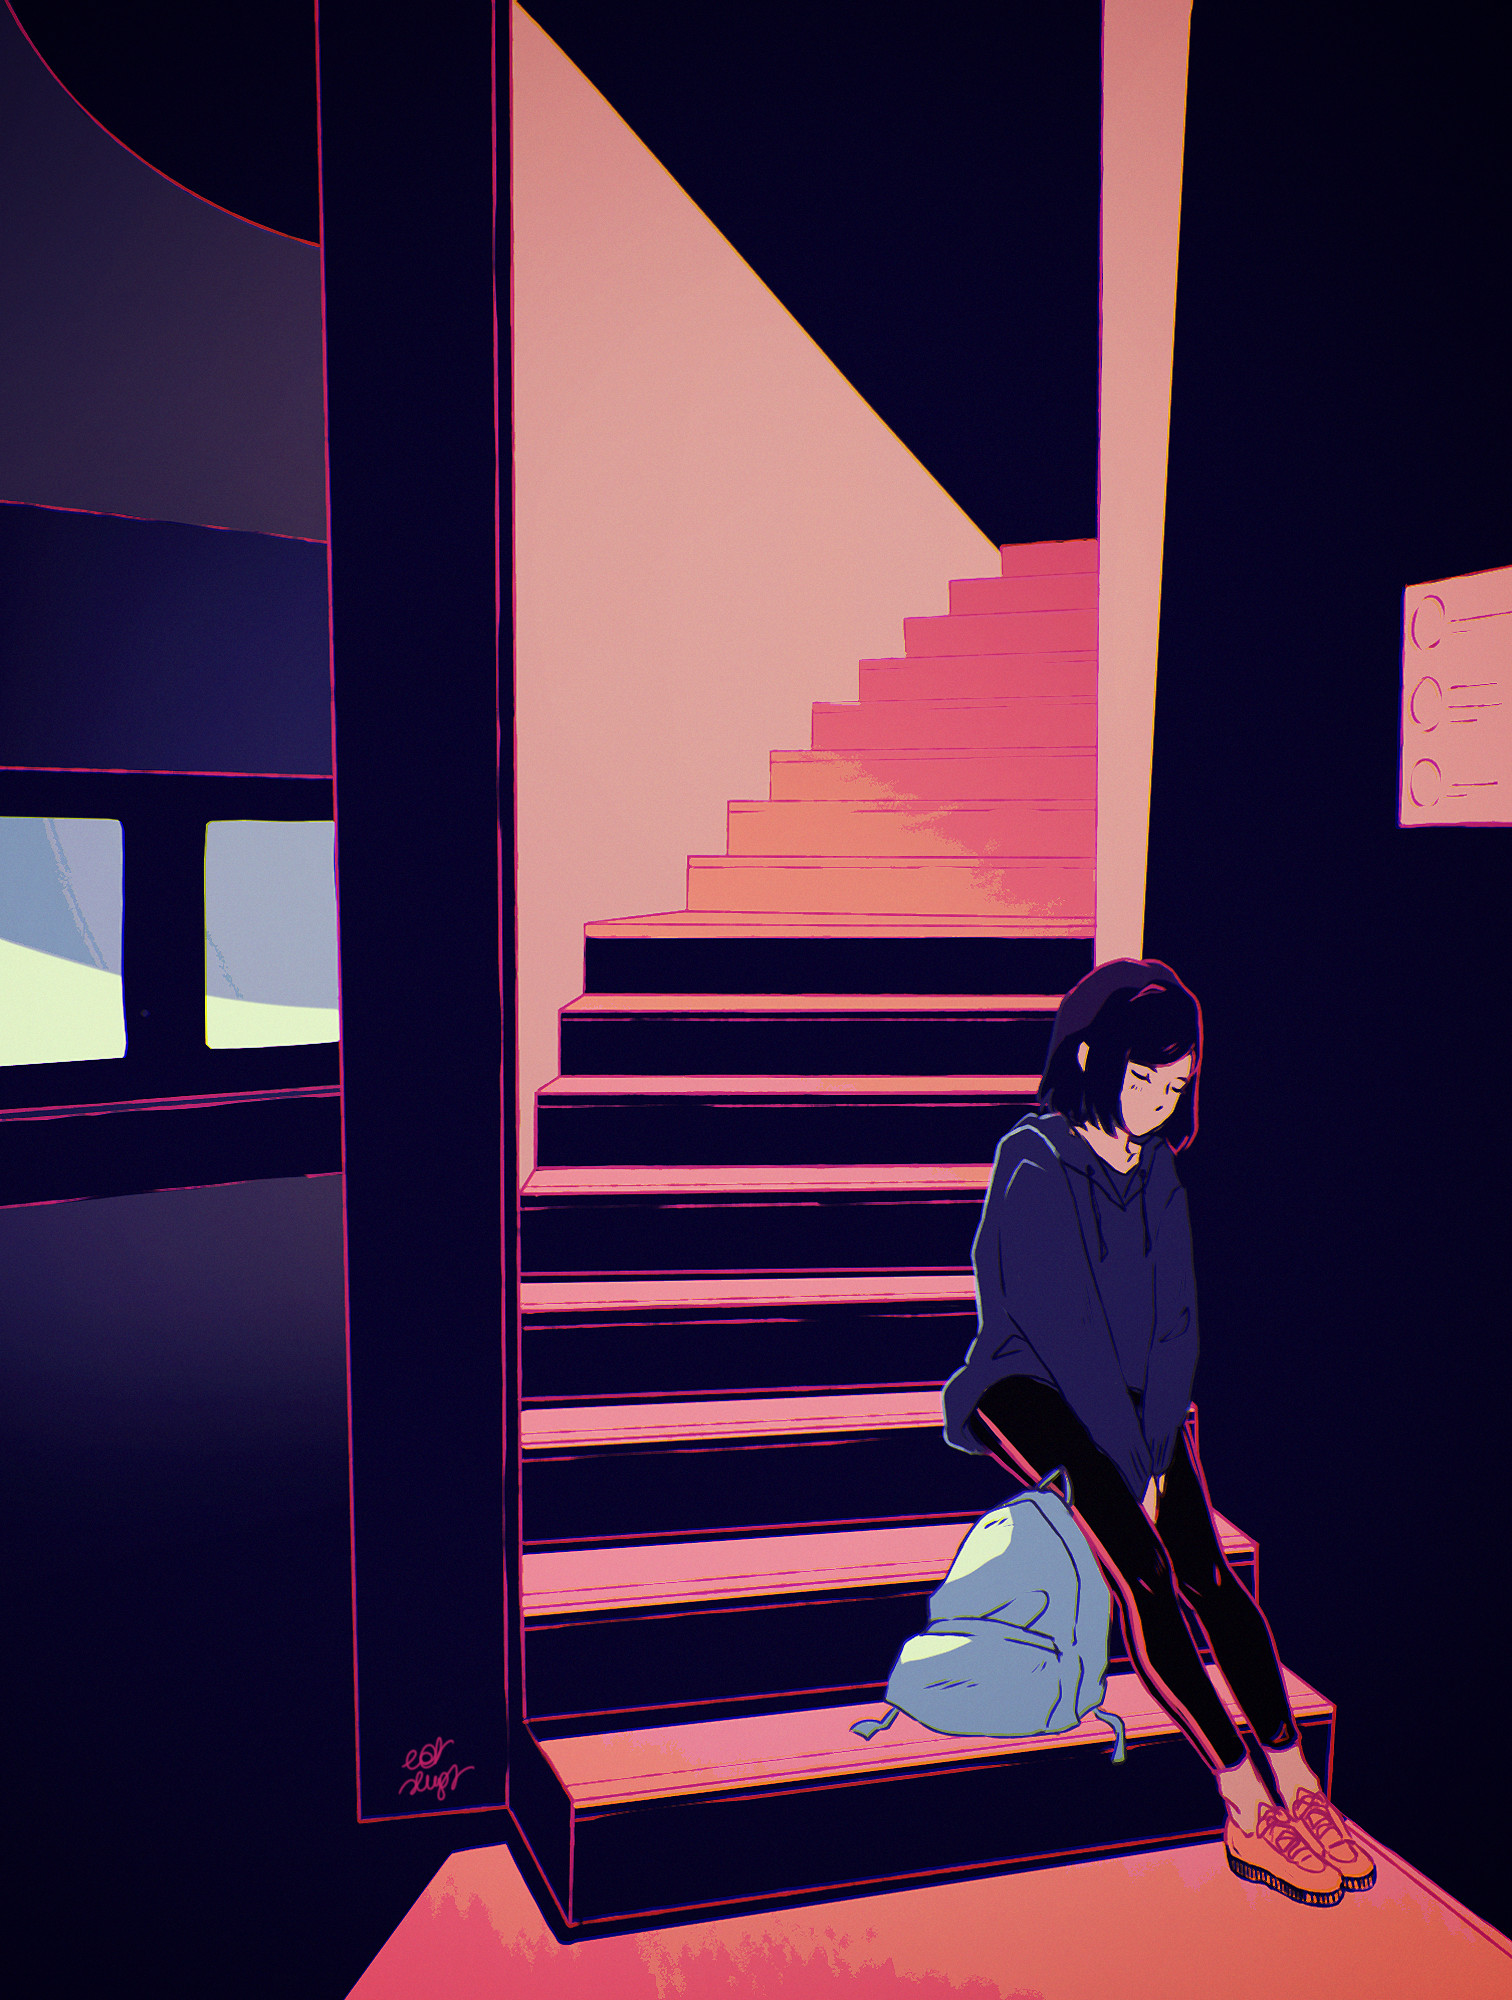 sadness, art, vector, girl, stairs, ladder, loneliness, sorrow mobile wallpaper